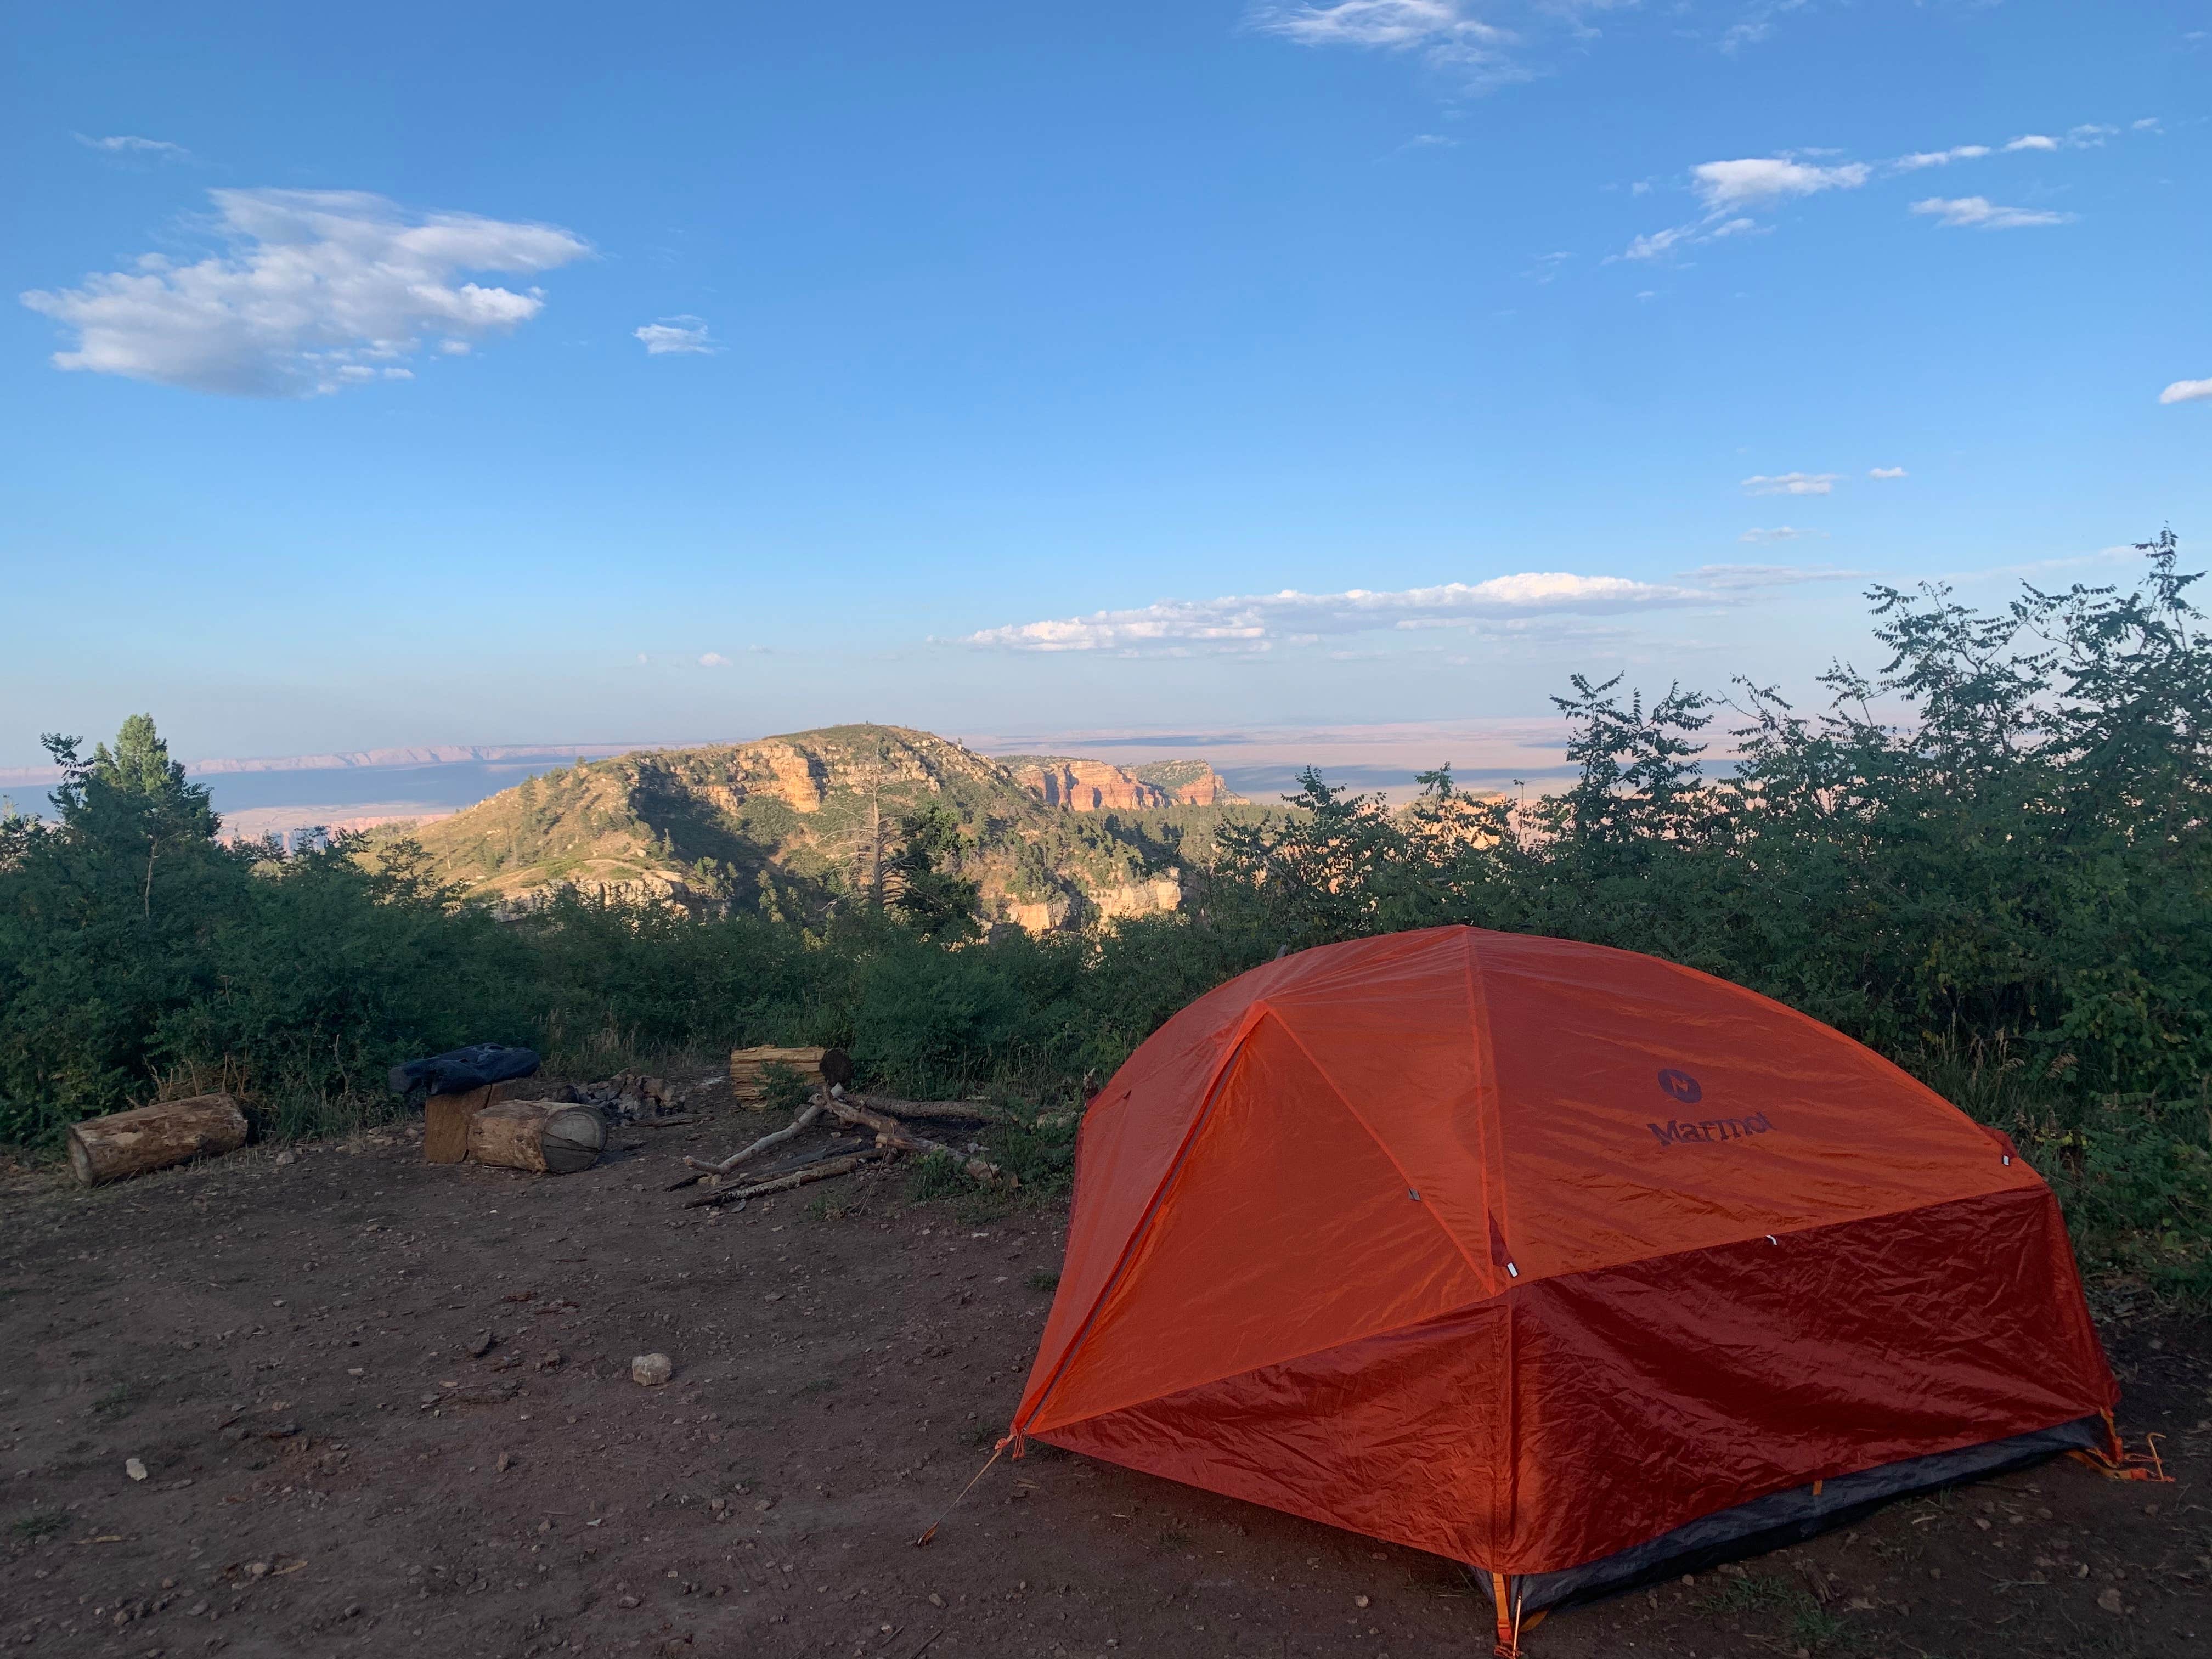 Camper submitted image from Saddle Mountain (Kaibab NF) - 1